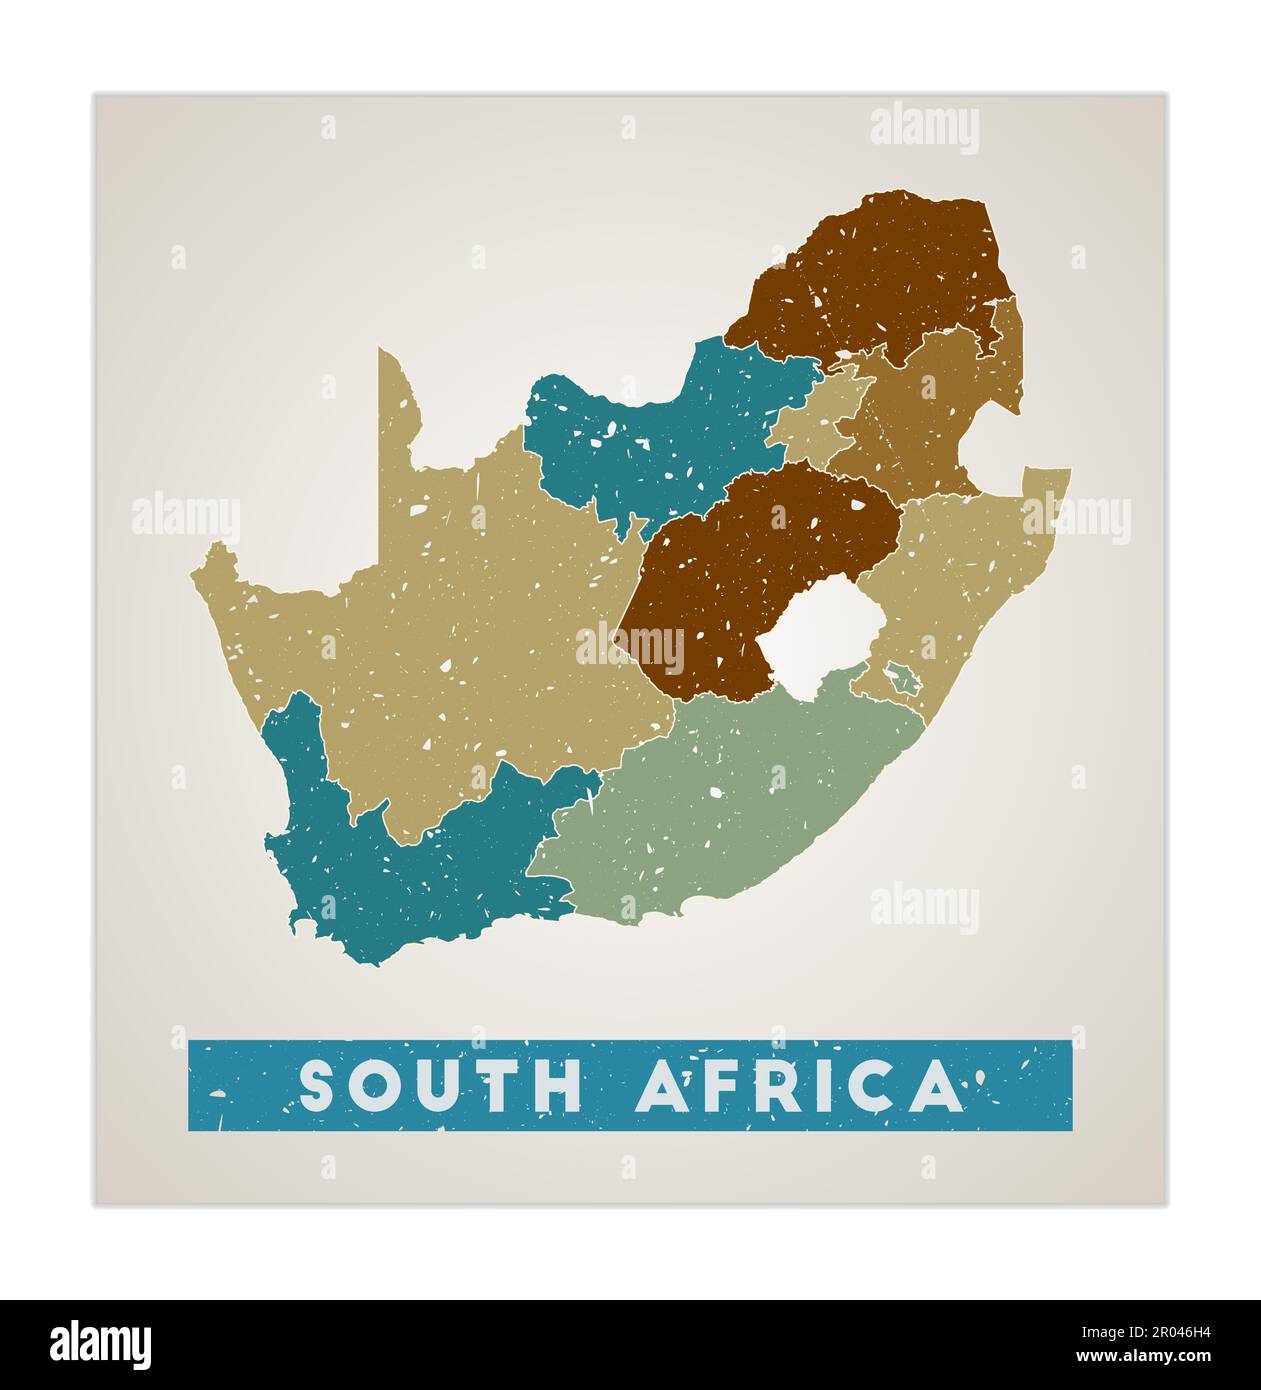 South Africa map. Country poster with regions. Old grunge texture. Shape of South Africa with country name. Stylish vector illustration. Stock Vector